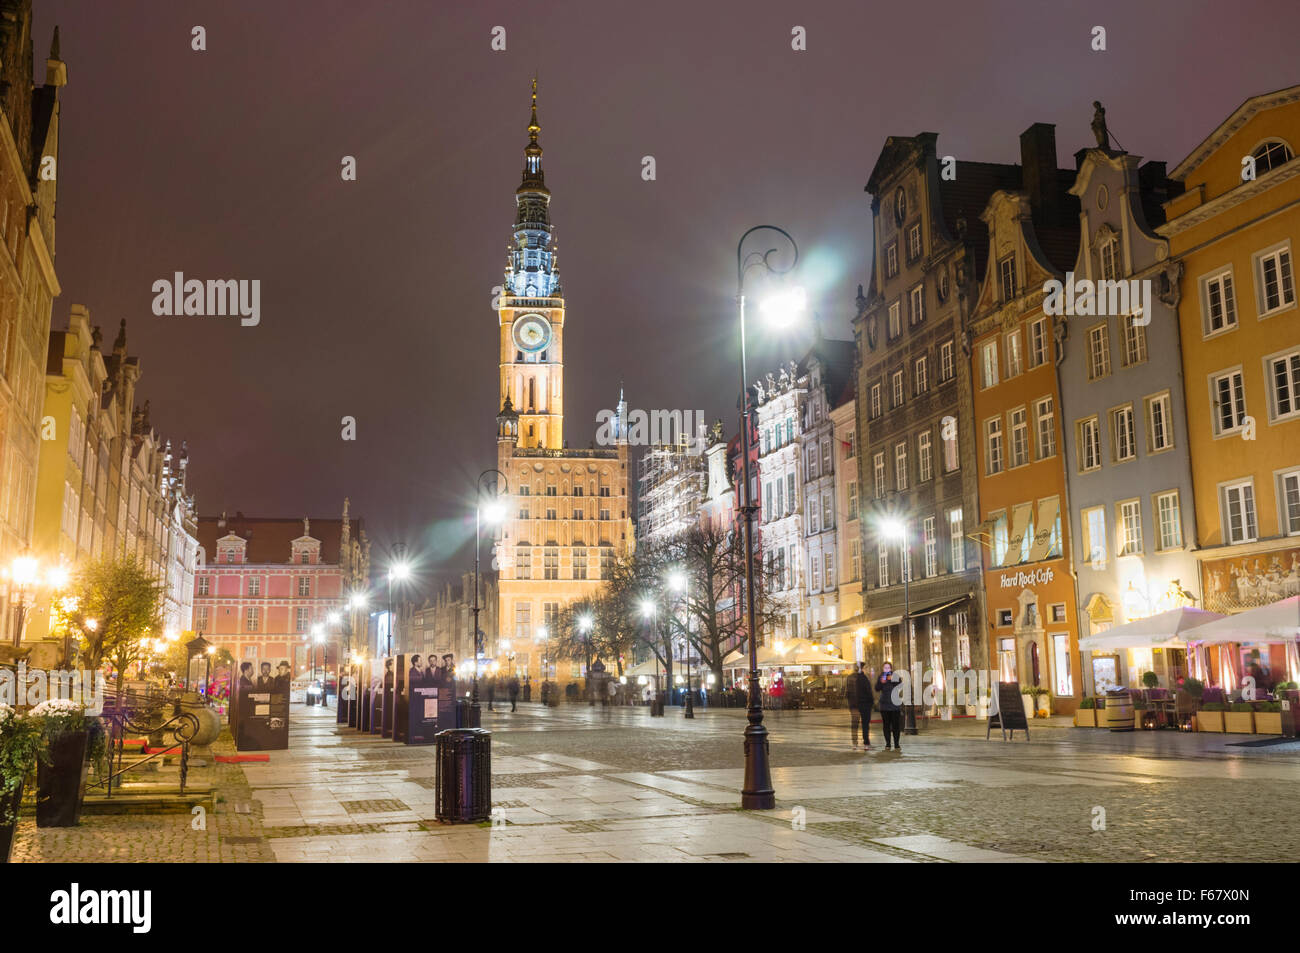 Long Market street and clock tower of city council by night. Gdansk, Poland Stock Photo